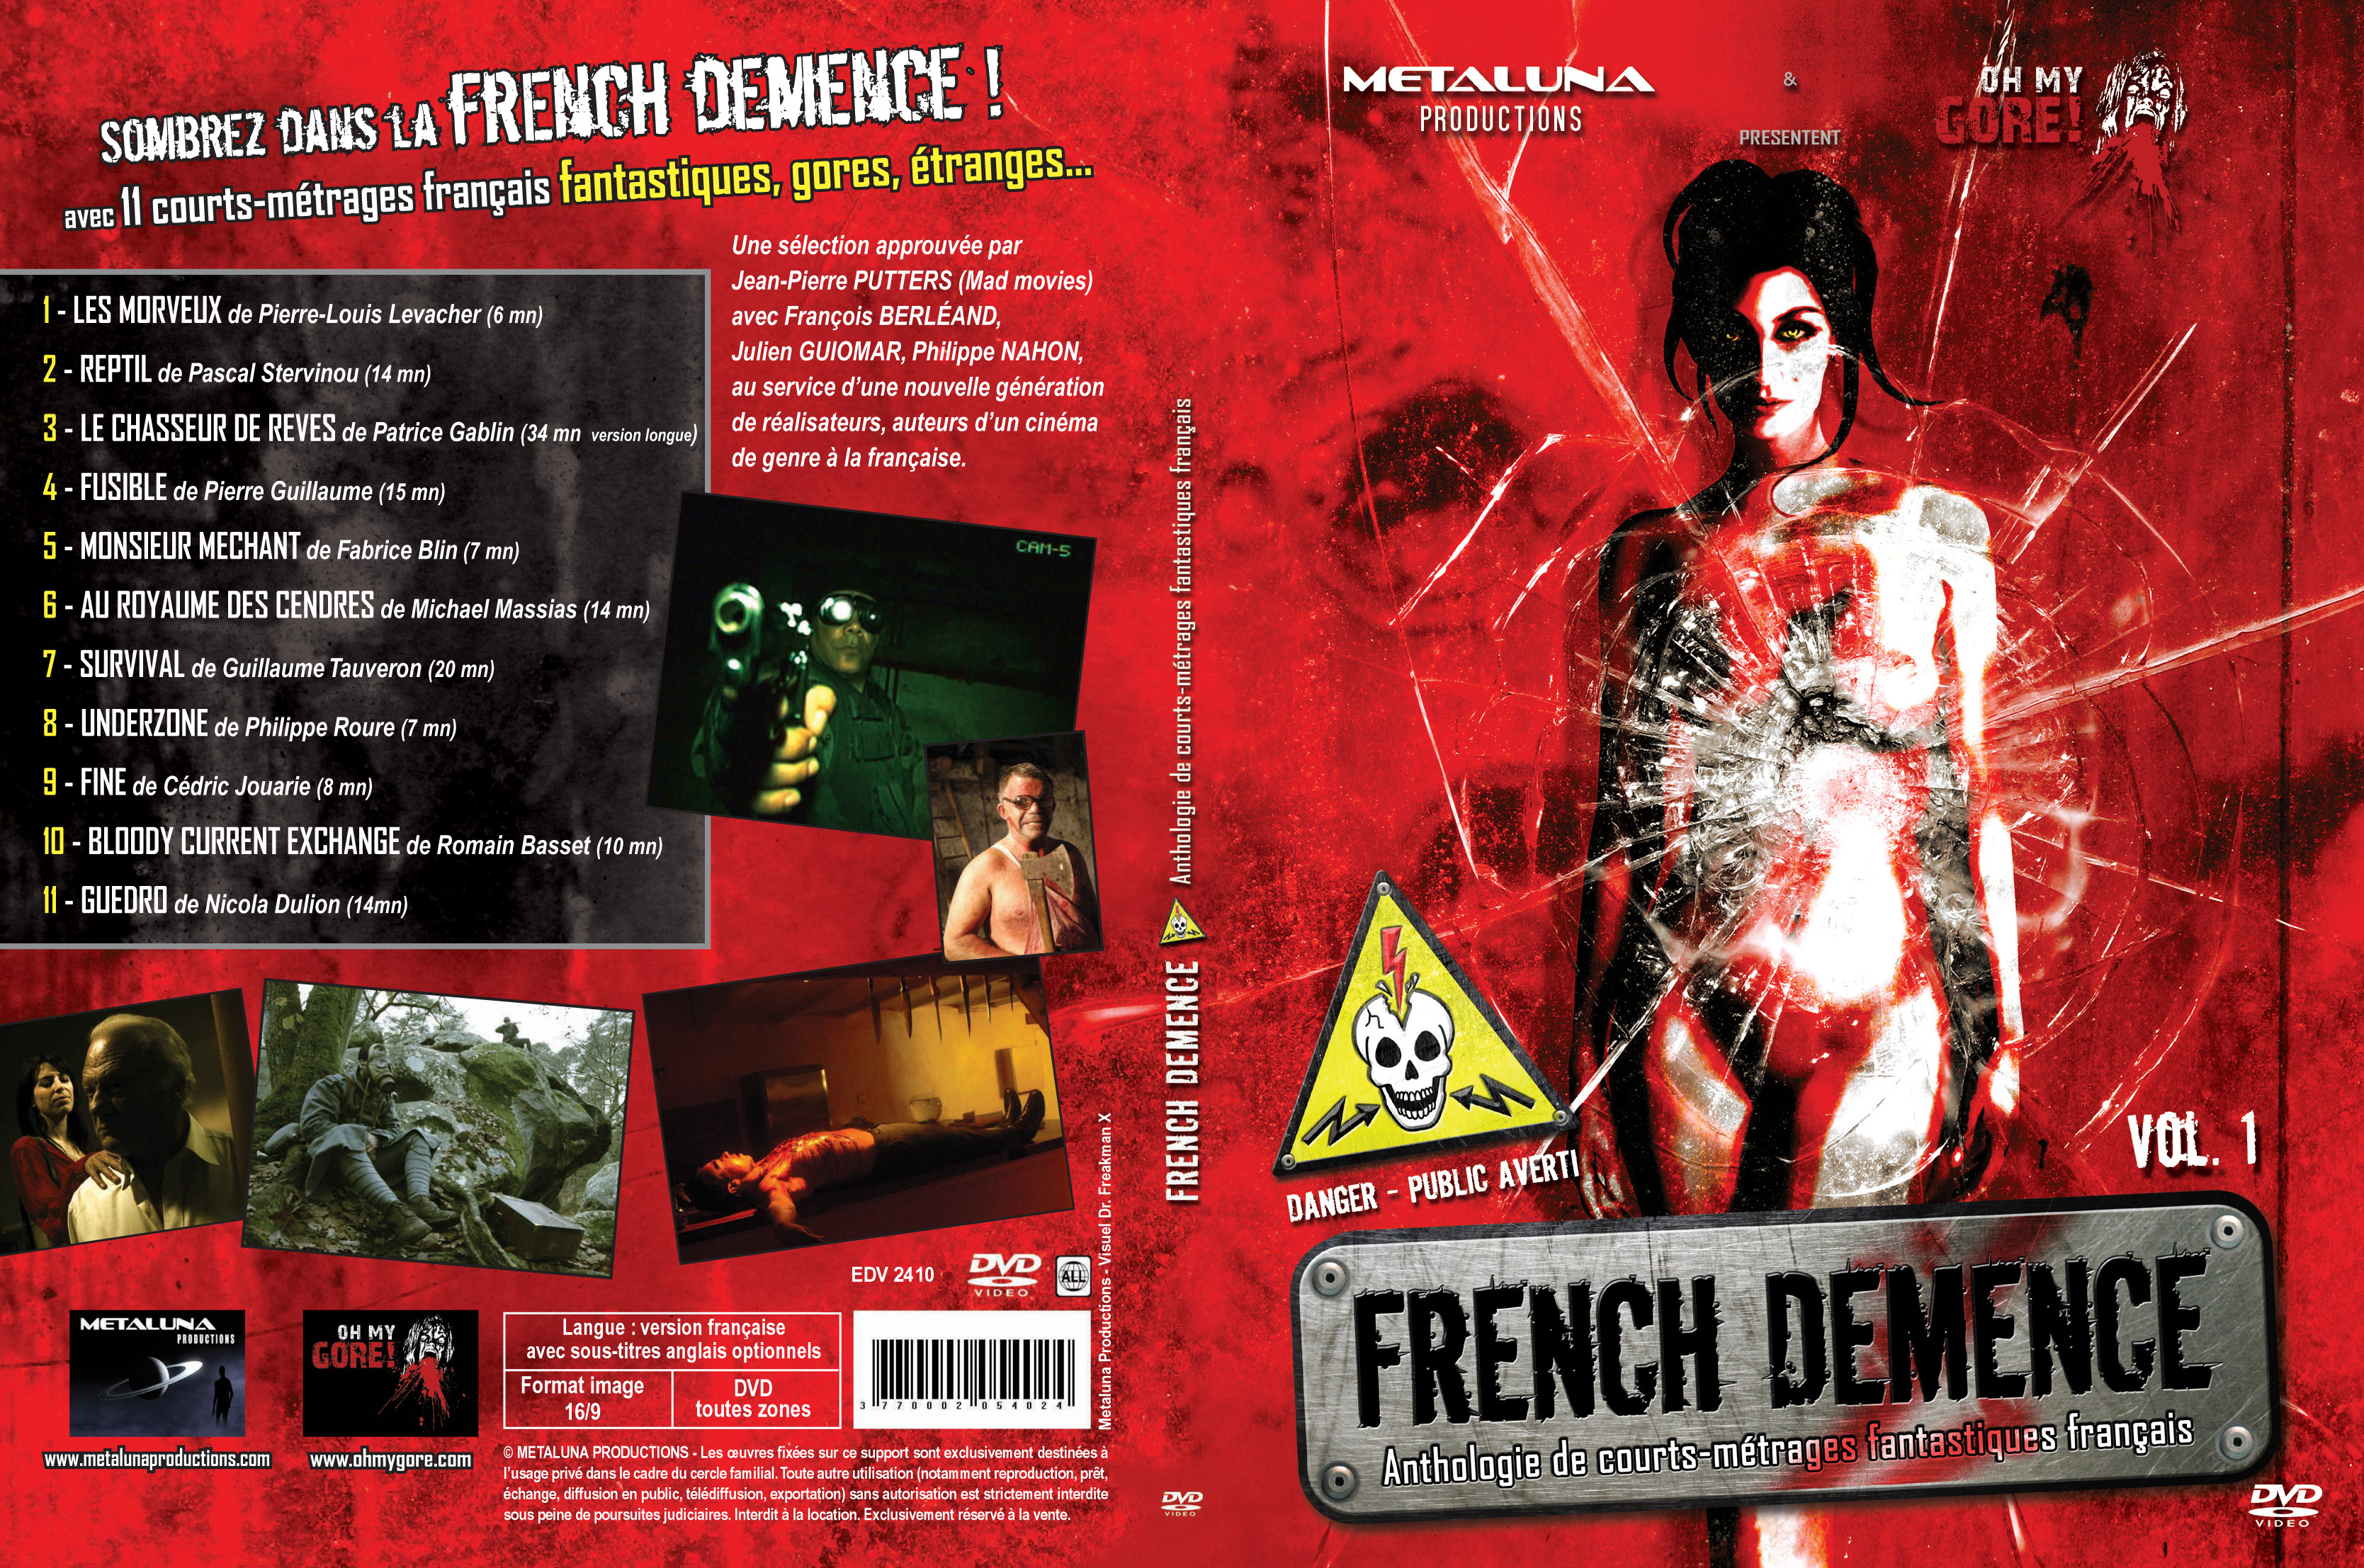 Jaquette DVD French demence